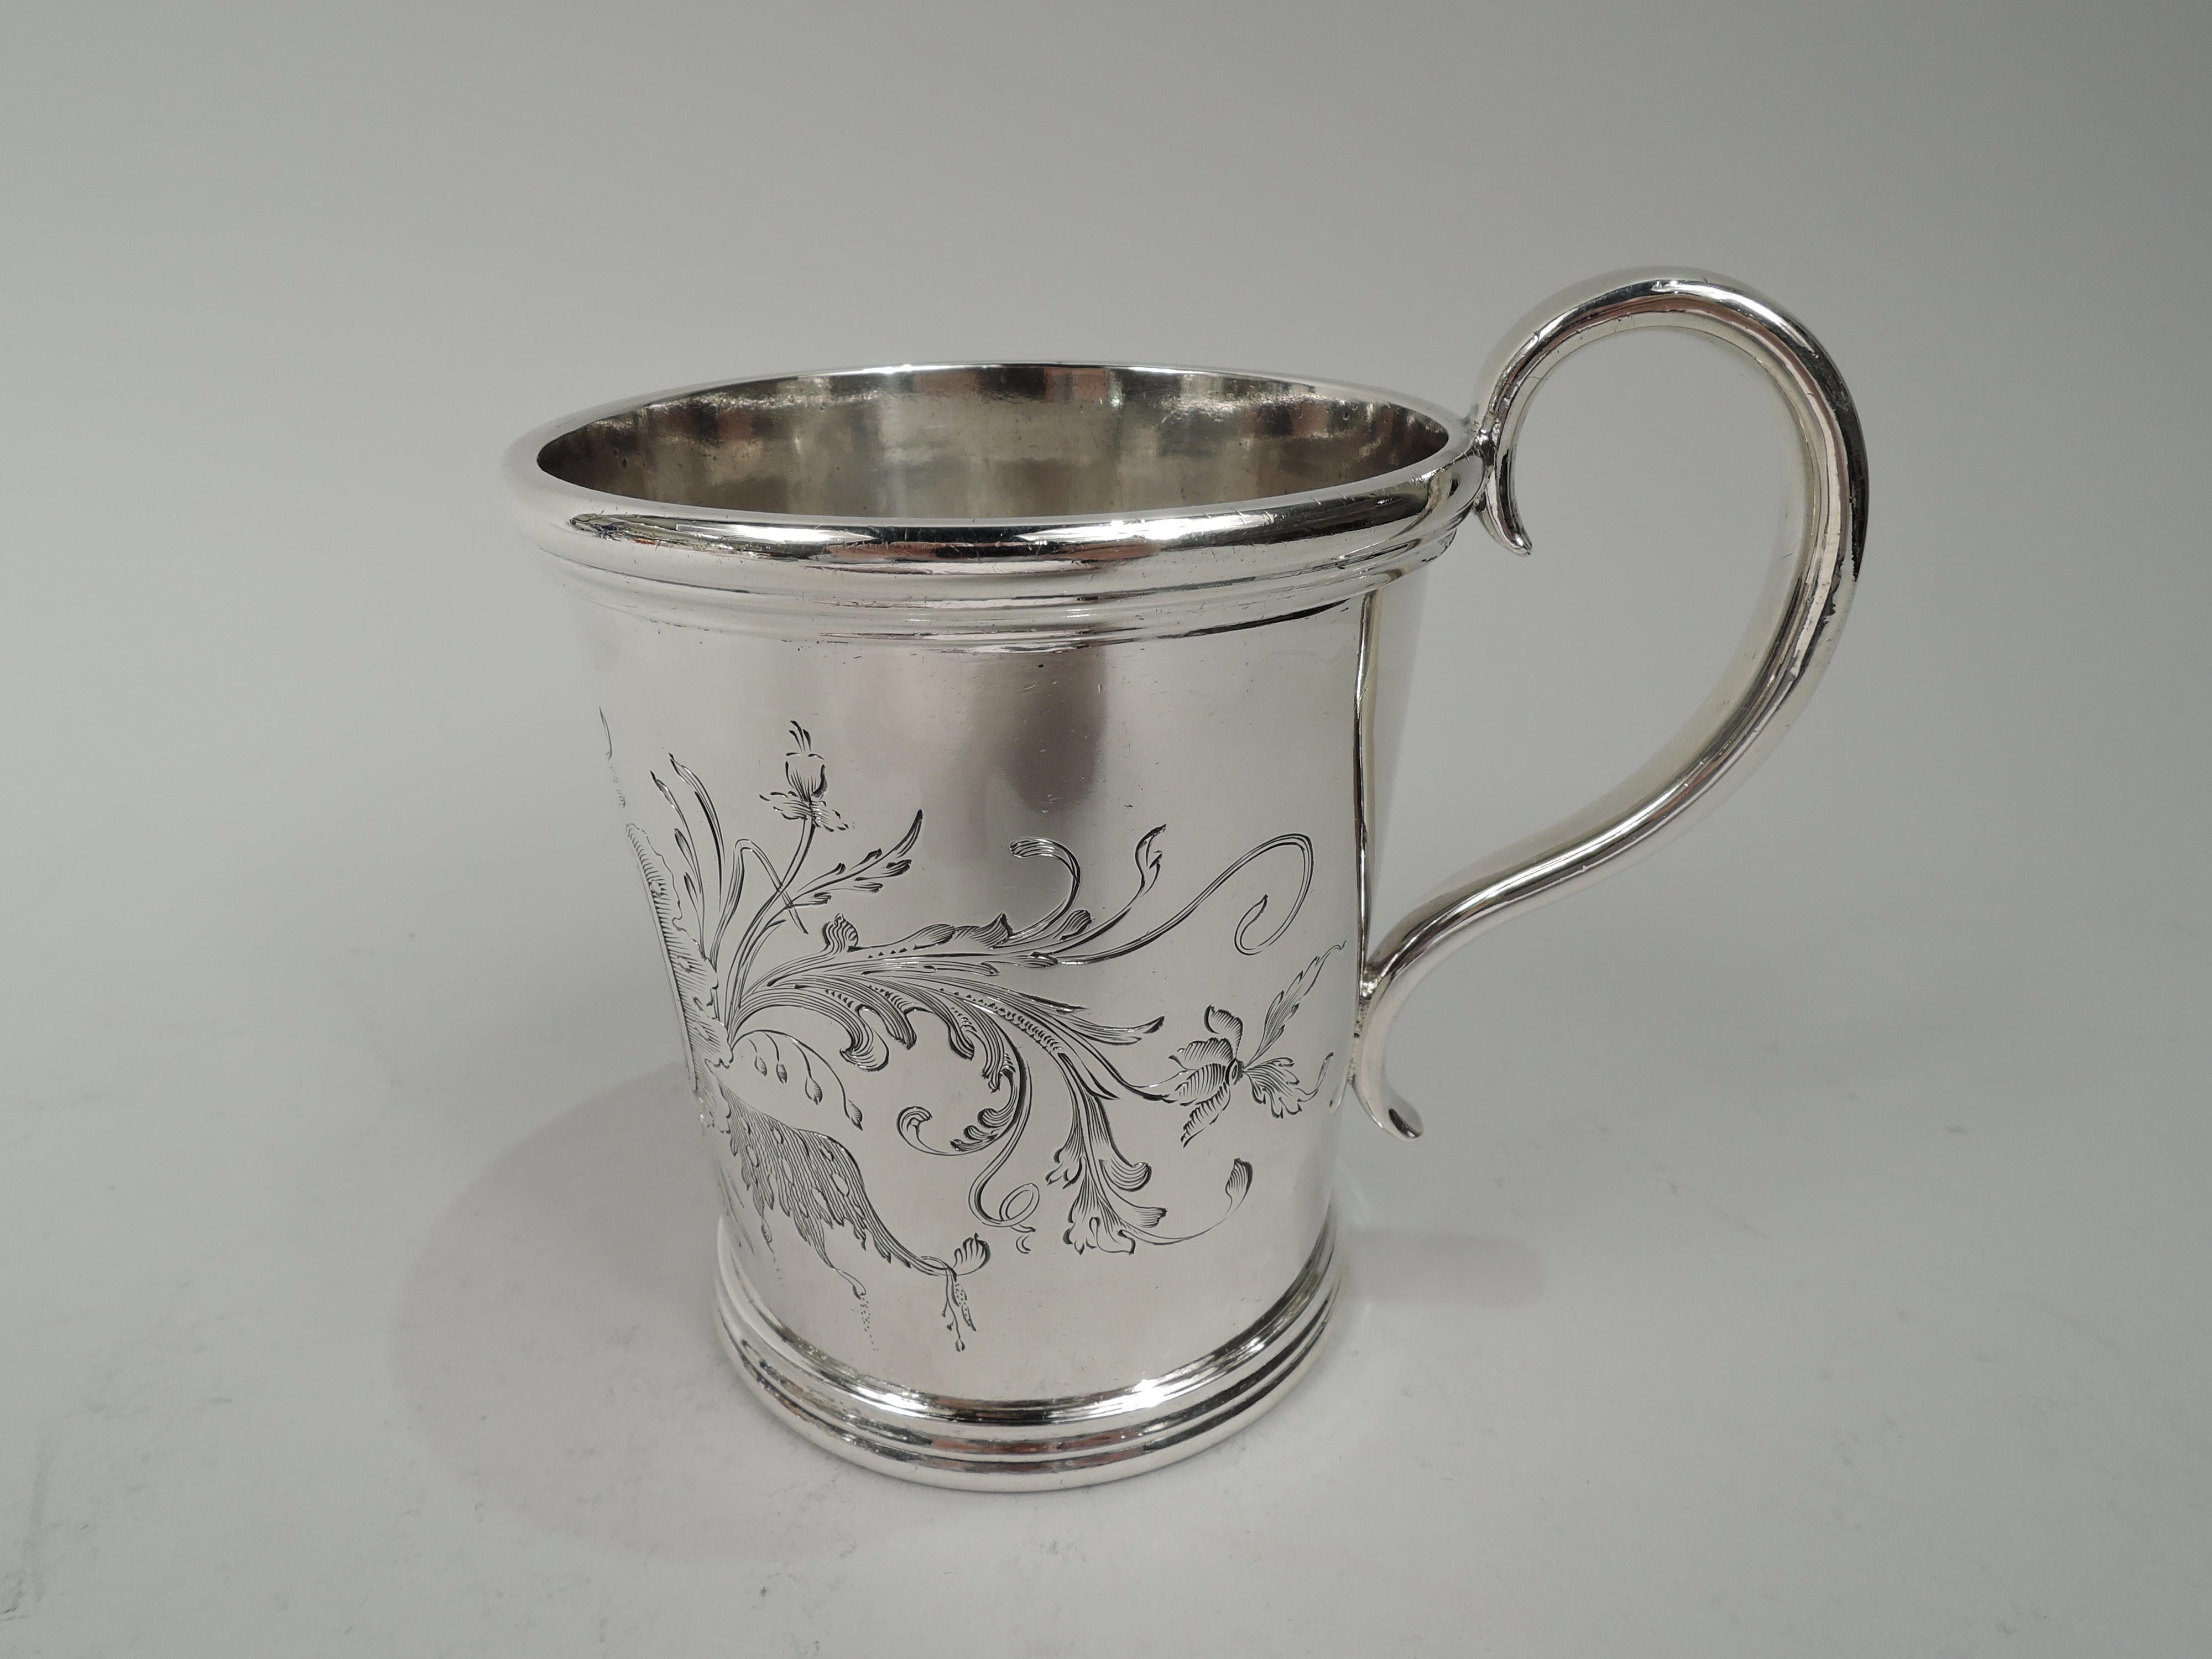 19th Century American Classical Coin Silver Baby Cup by Lincoln & Reed in Boston